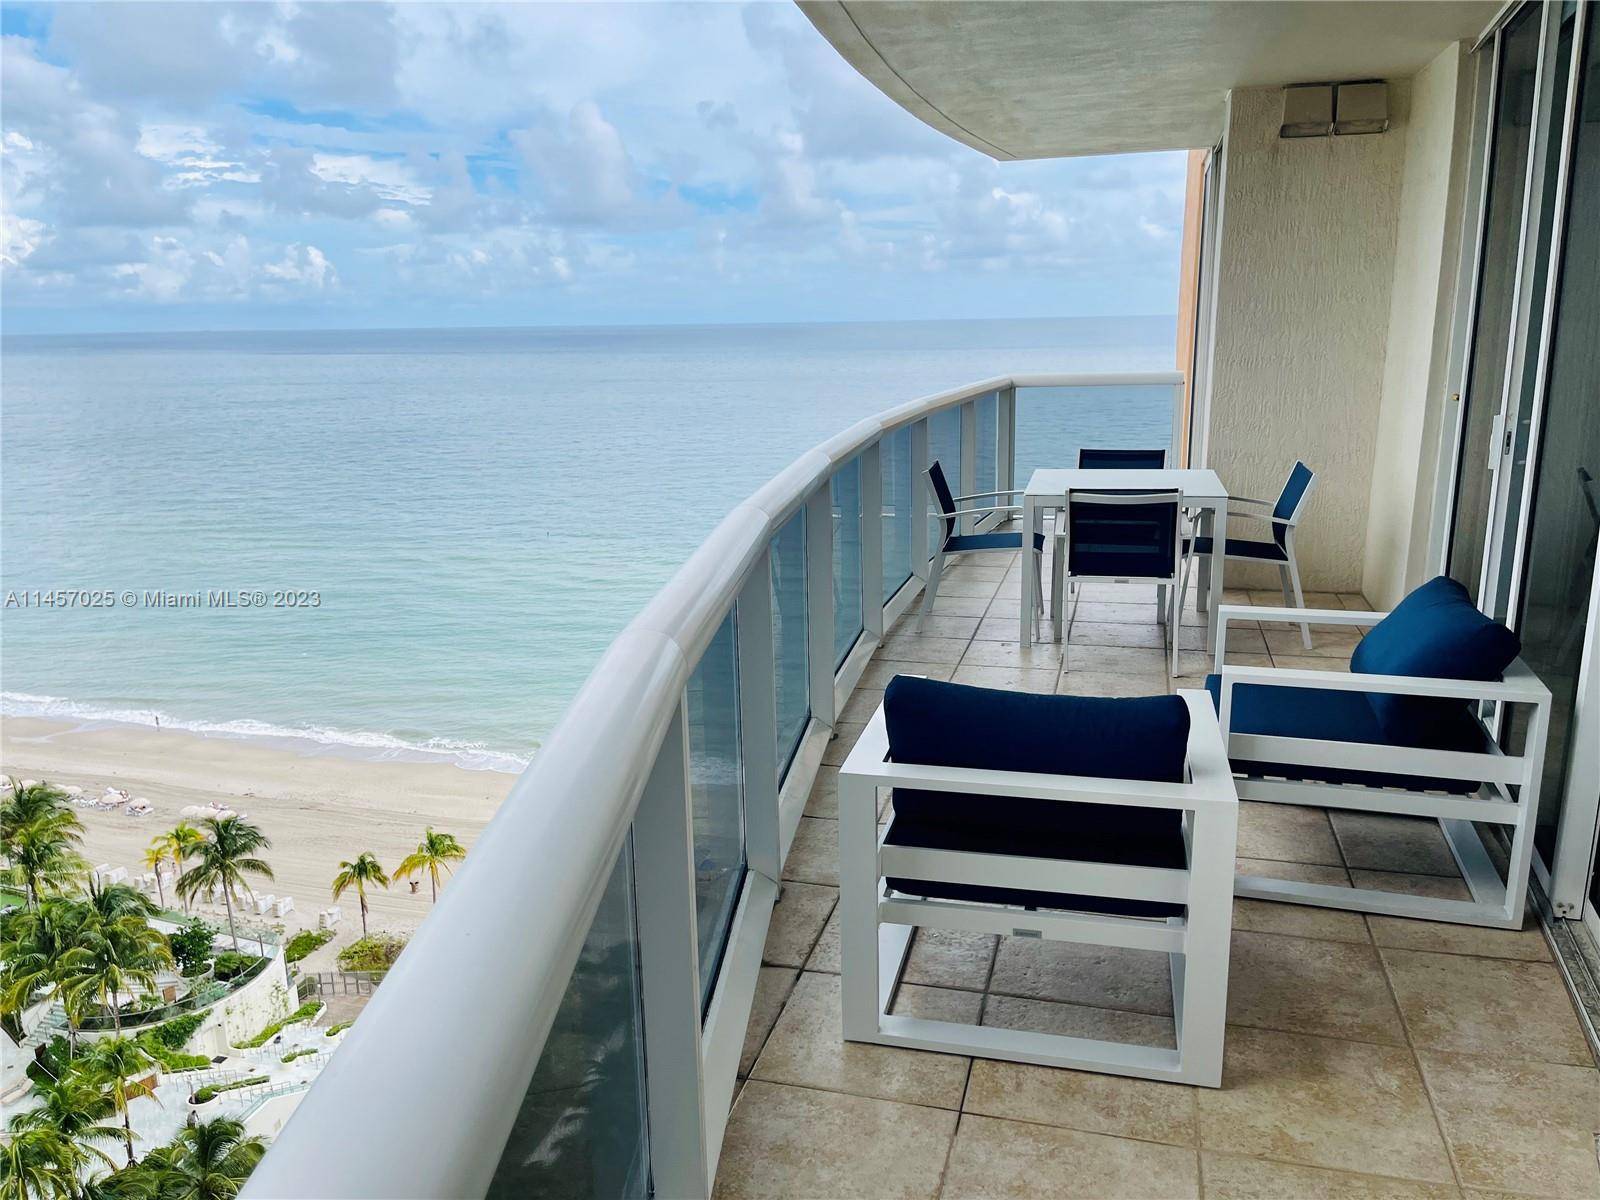 Luxurious apartment in sunny Isles Beach, ocean and intercostal view from the balcony and bedroom.